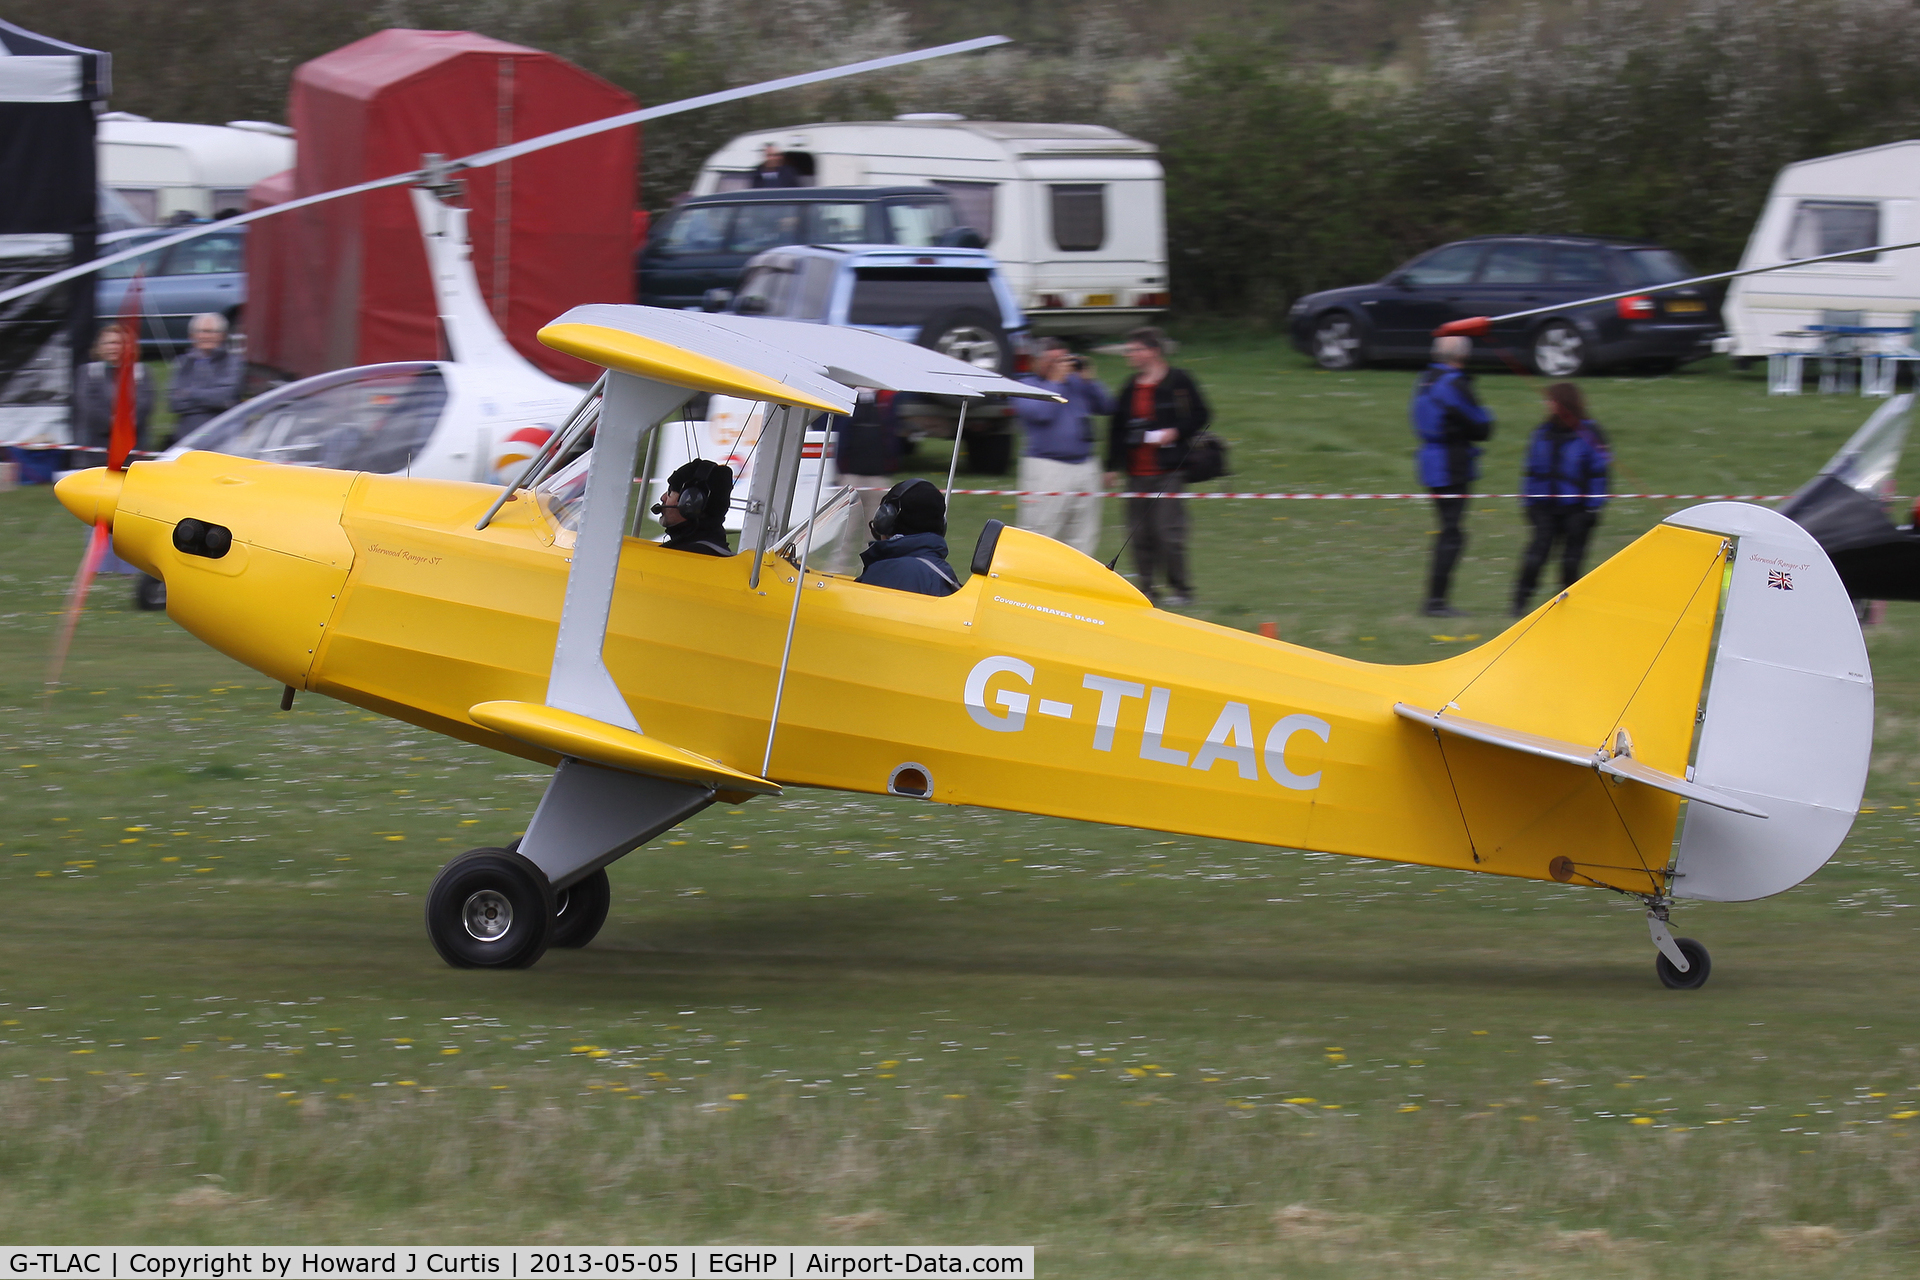 G-TLAC, 2009 TLAC Sherwood Ranger ST C/N PFA 237B-13895, Privately owned, at the Microlight Trade Fair.